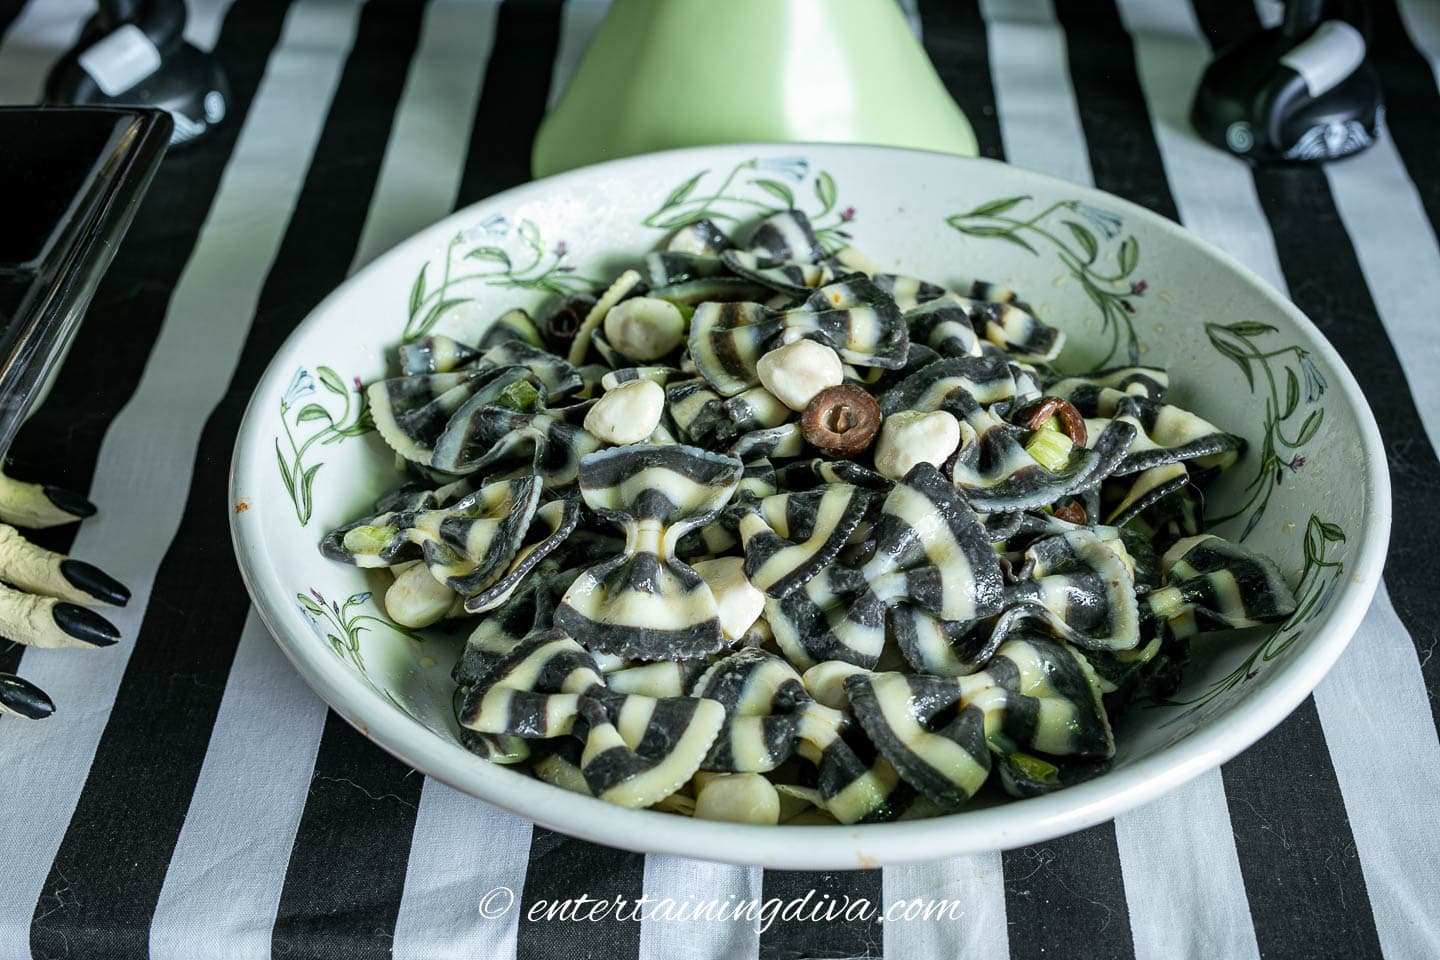 A black and white striped tablecloth with black and white pasta salad in a bowl.